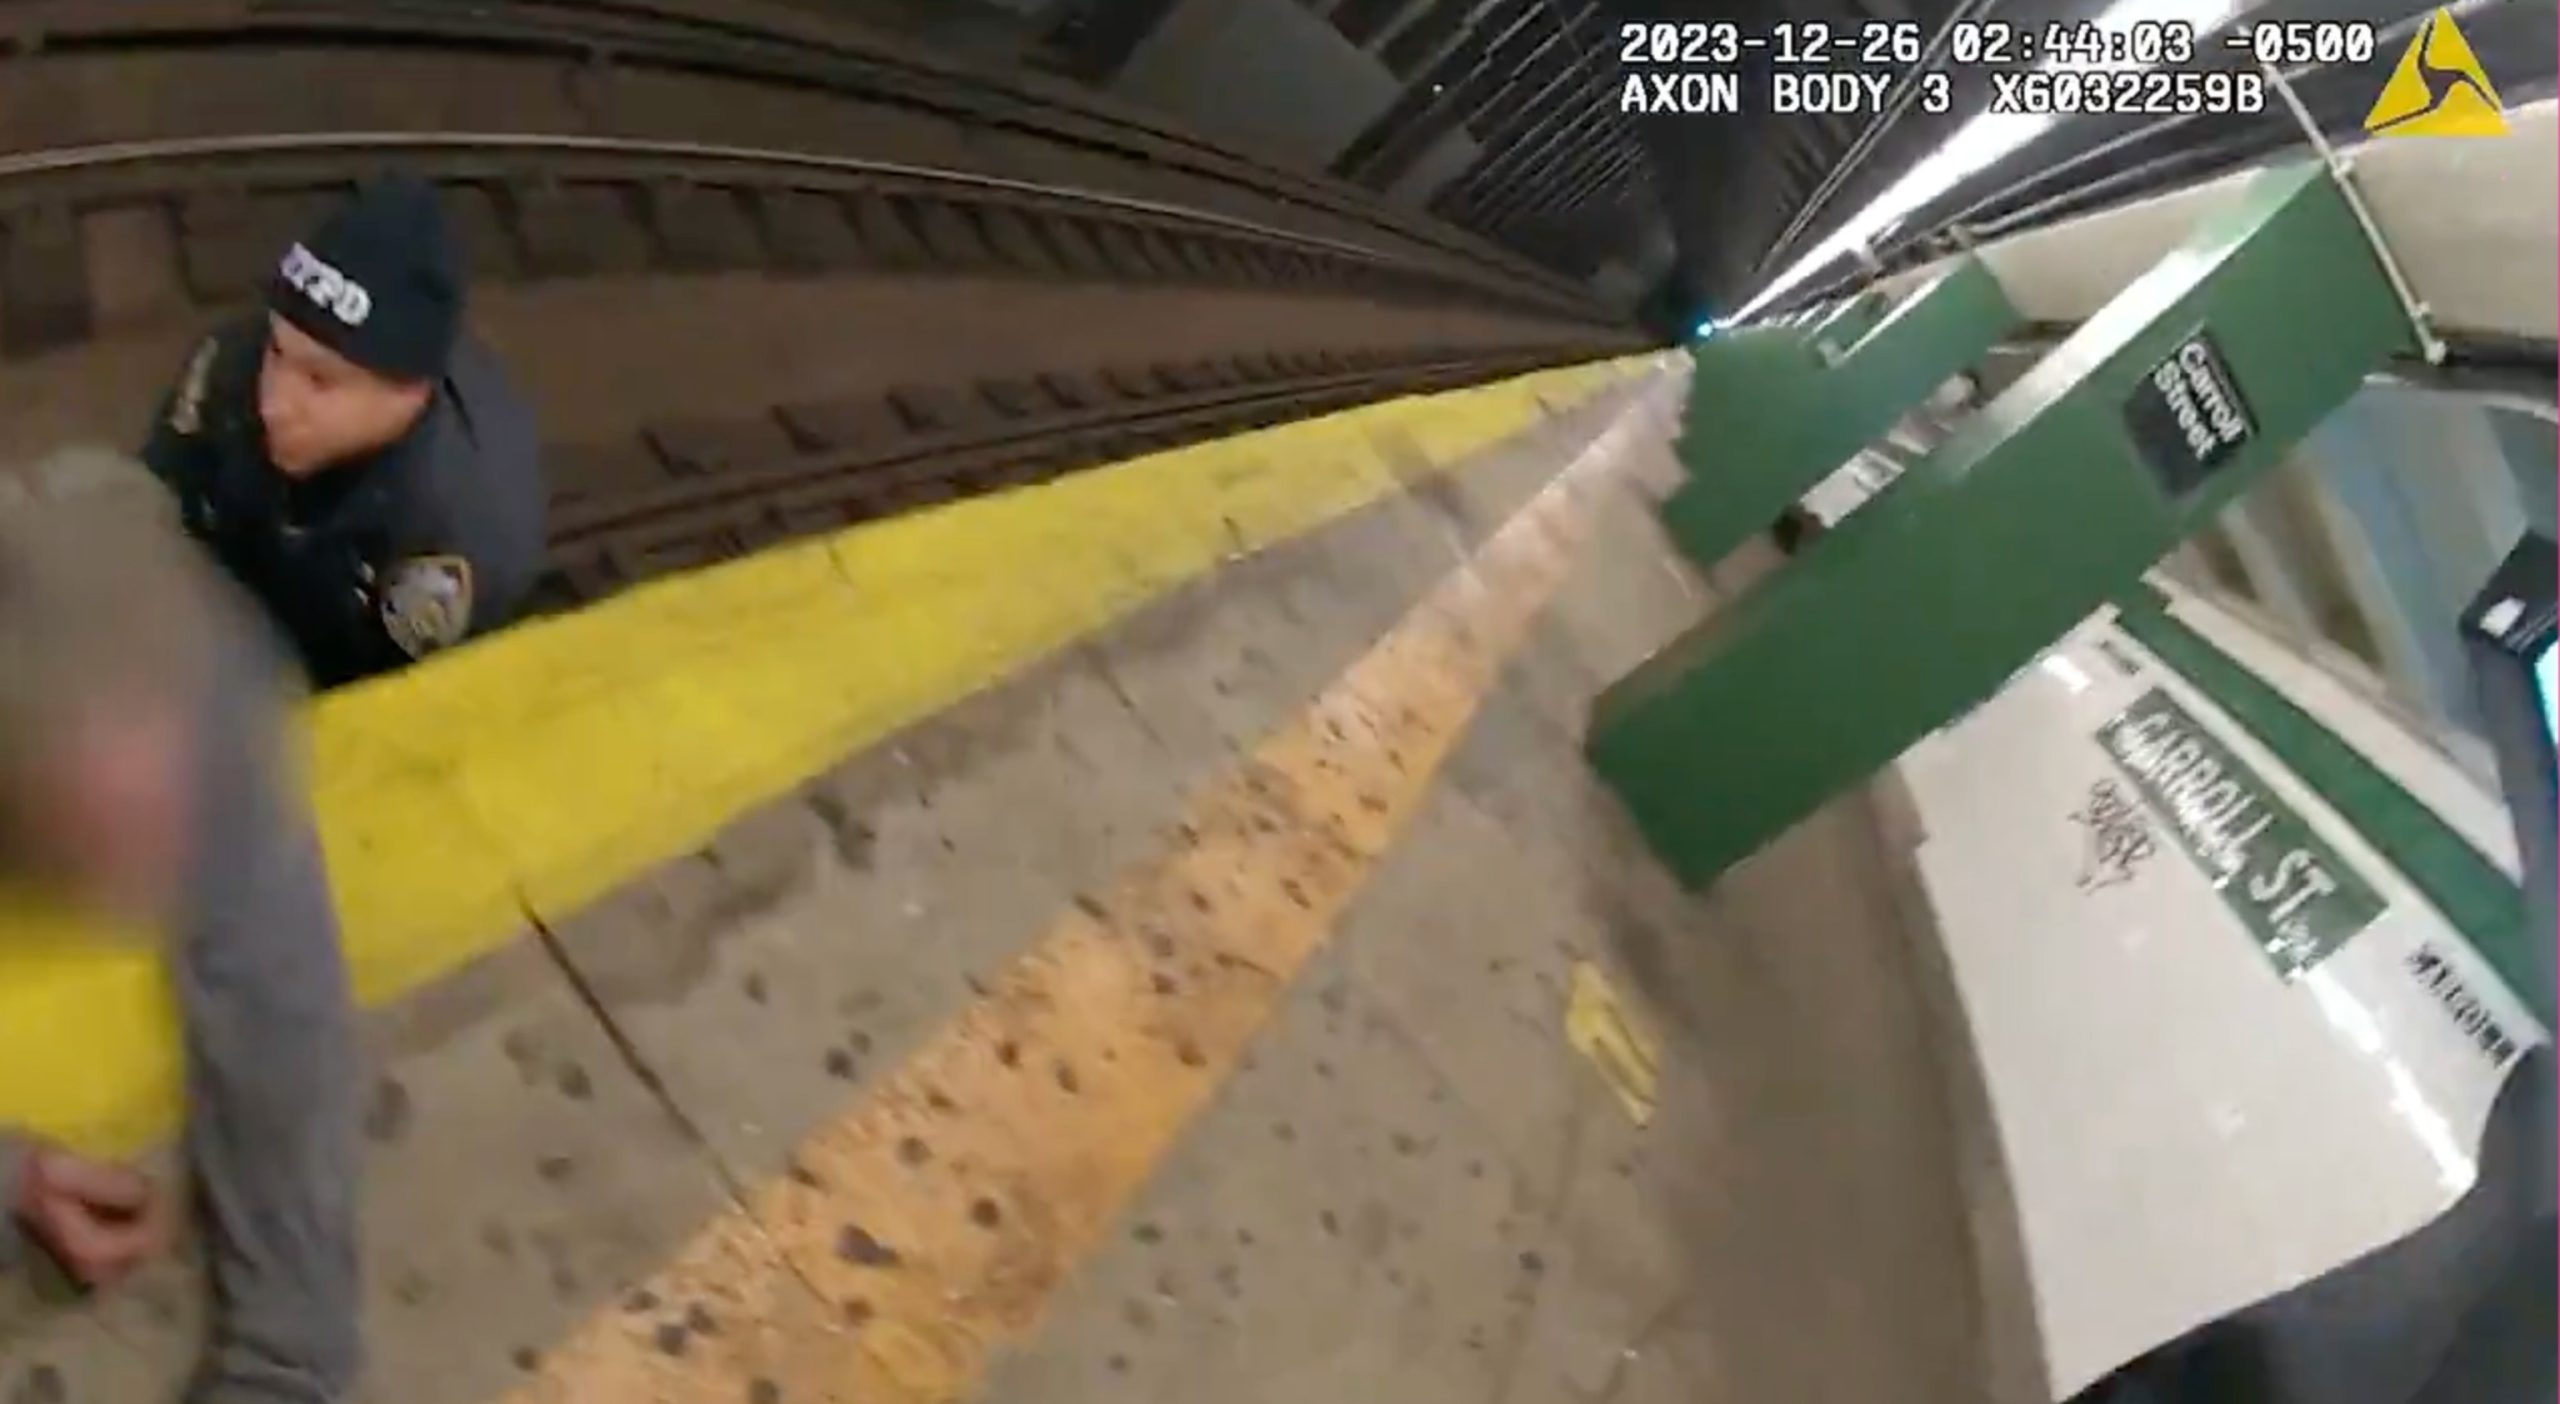 NYPD Officers Assist in Rescuing Man Who Accidentally Fell onto Subway Tracks